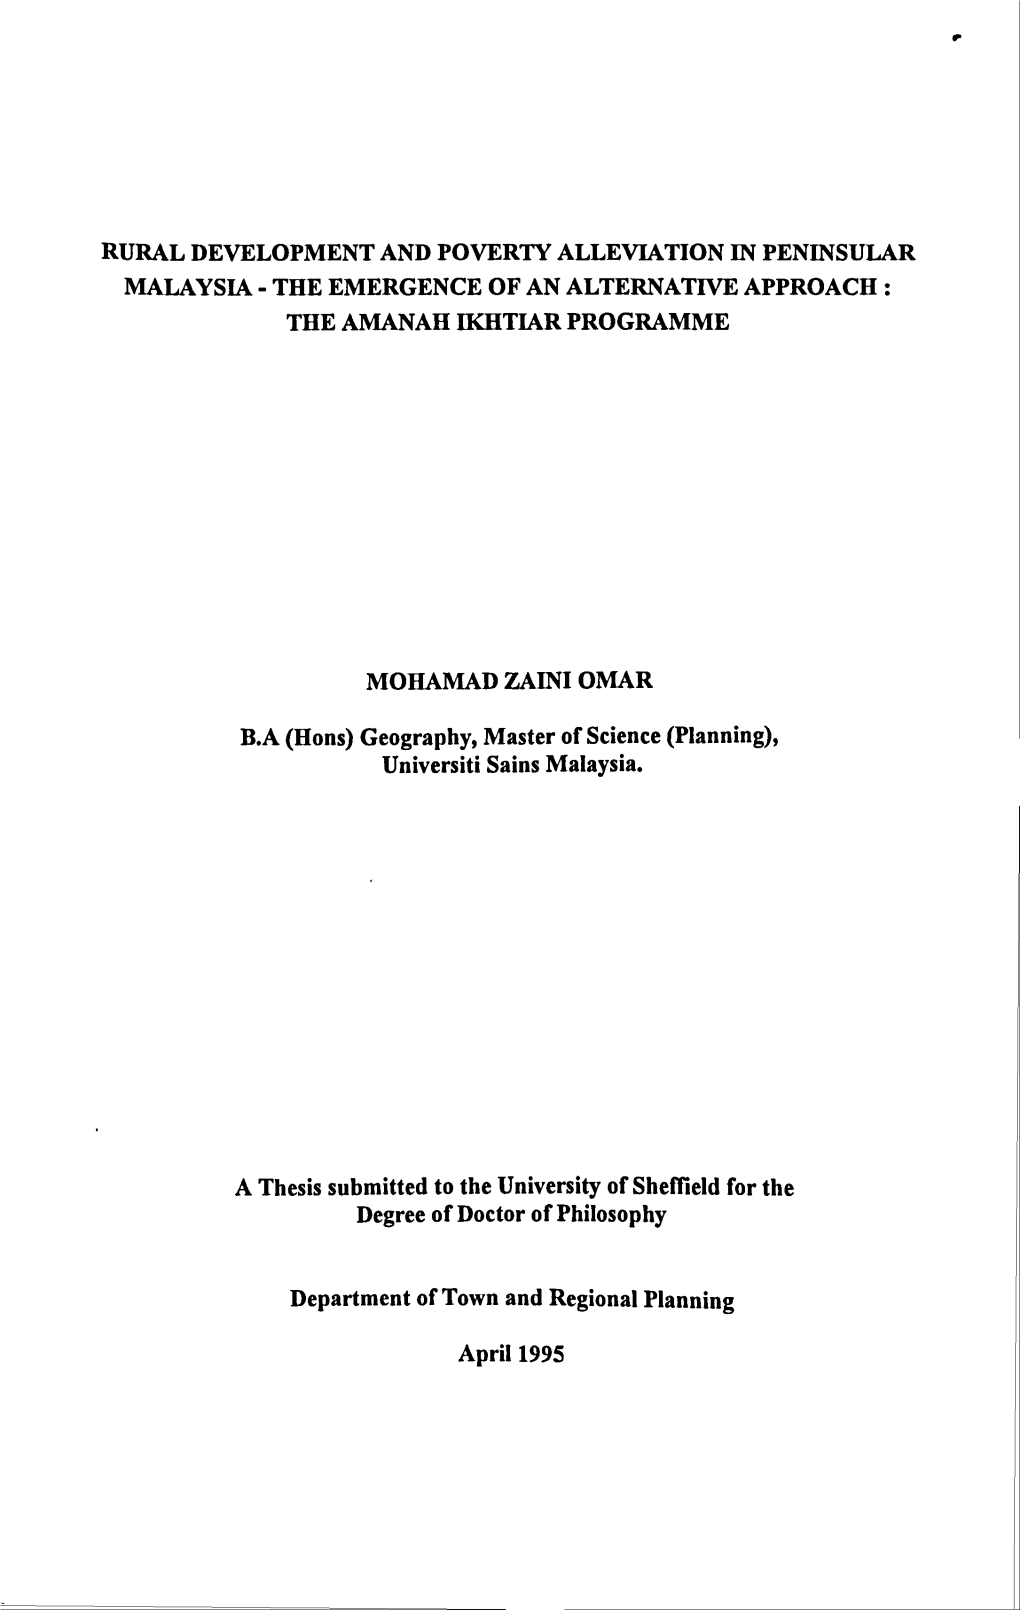 Rural Development and Poverty Alleviation in Peninsular Malaysia - the Emergence of an Alternative Approach: the Amanah Ikhtiar Programme